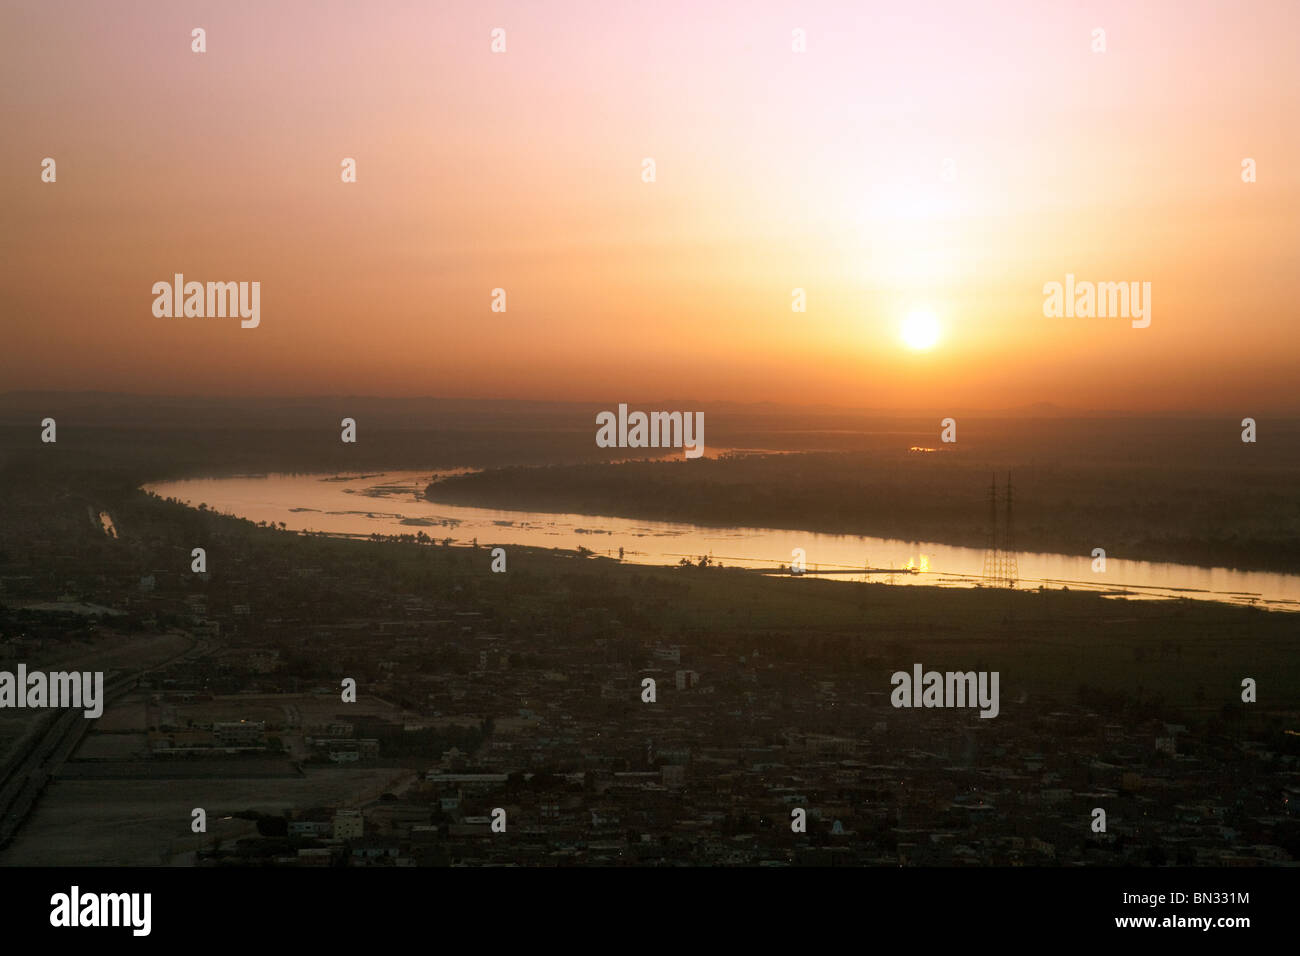 Sunrise over the river Nile at Luxor, Egypt, seen from the air in a hot air balloon Stock Photo